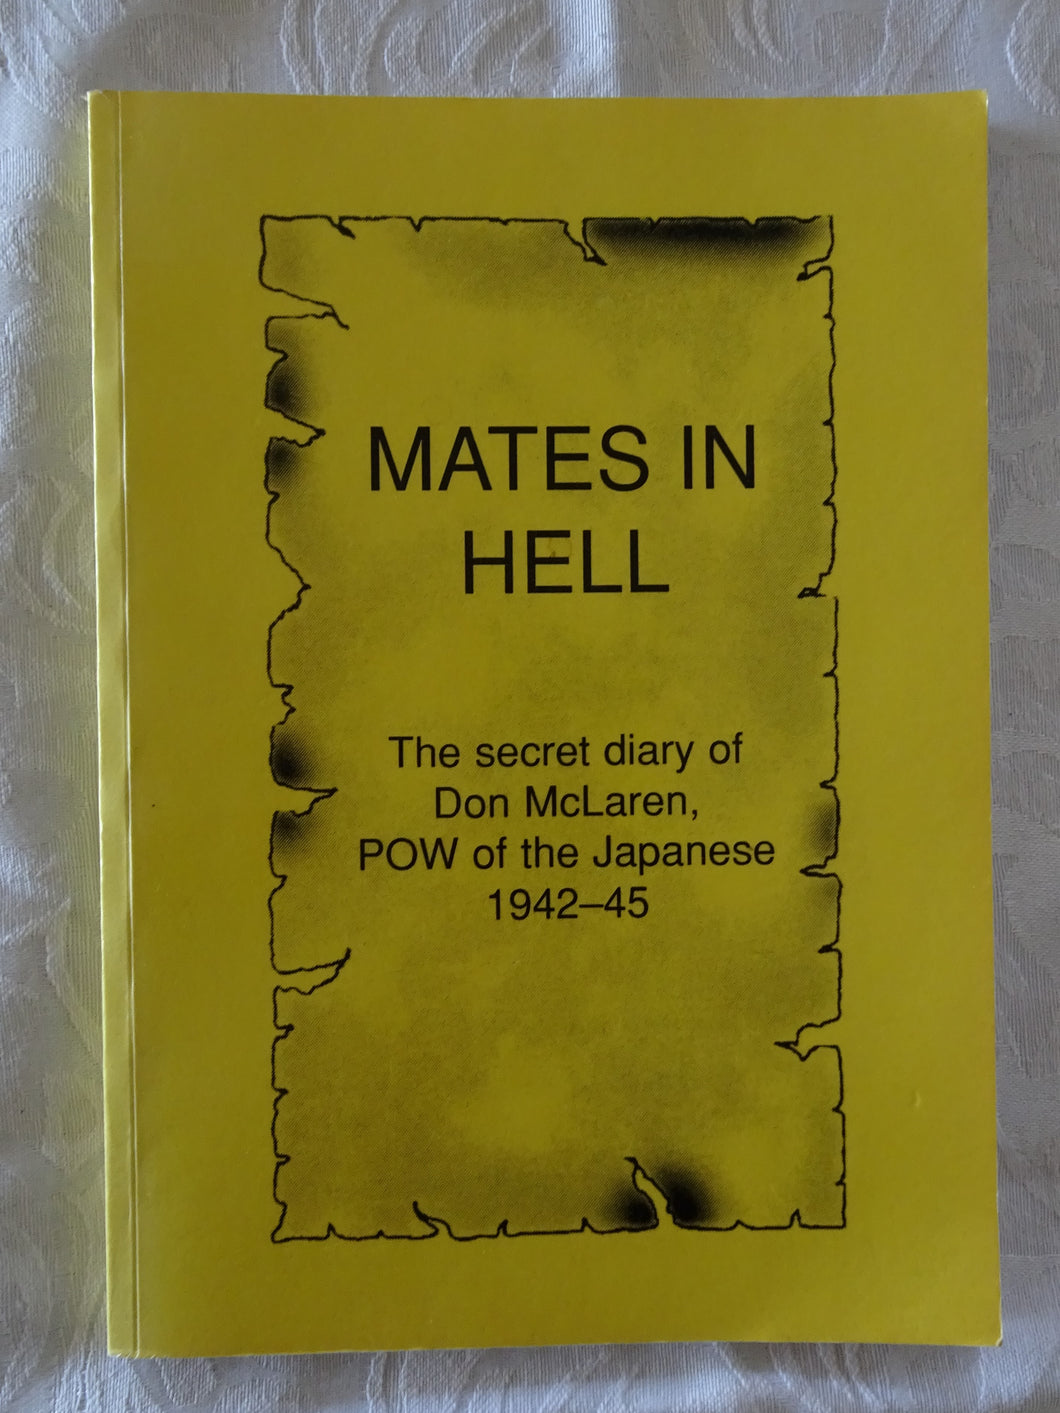 Mates In Hell by Don McLaren